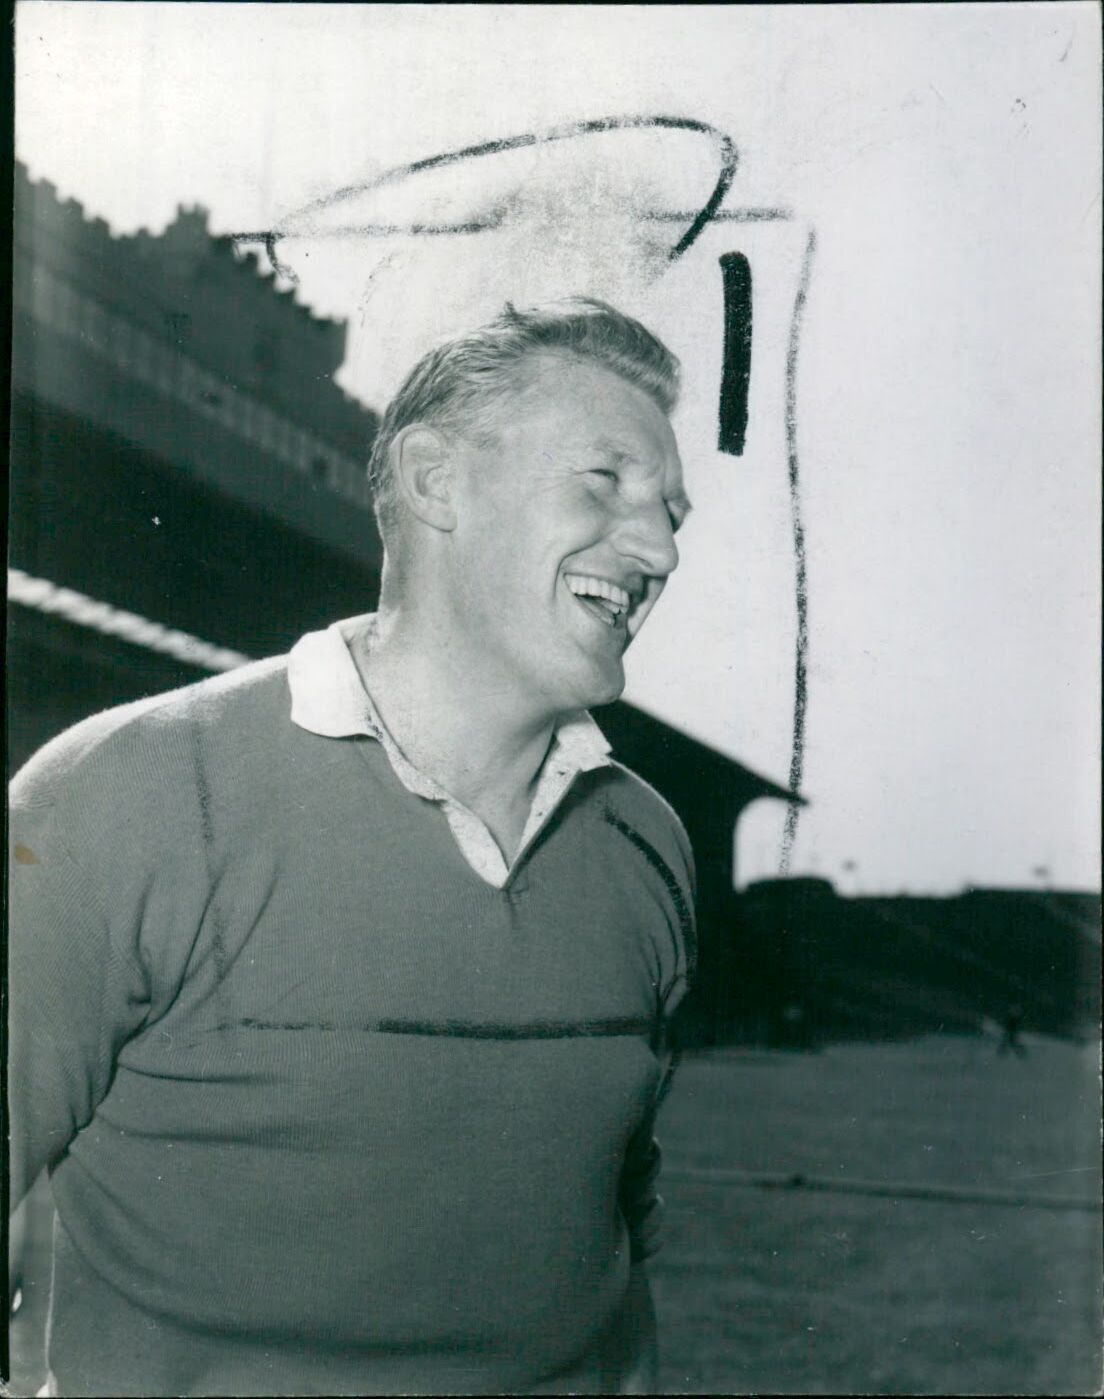 1957 - YOUNG GEORGE EX FOOTBALLER PEOPLE SPORTS... - Vintage Photograph 3852094